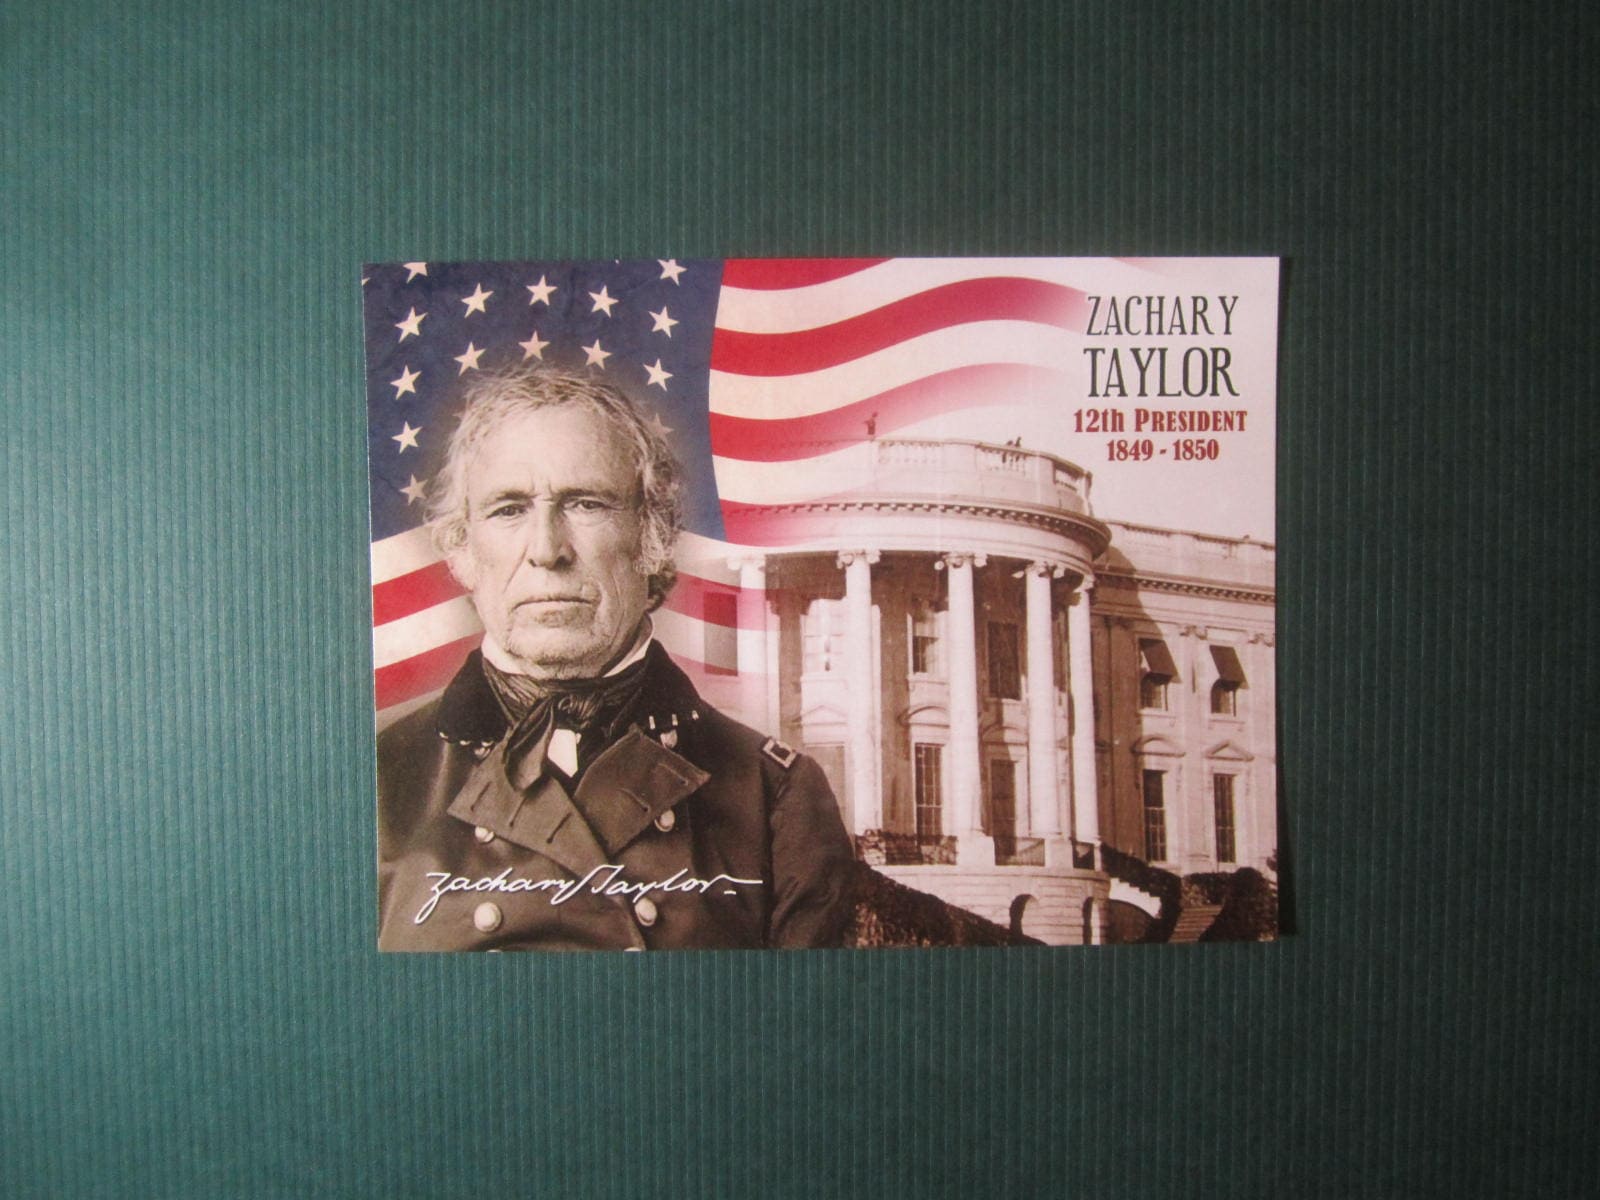 Zachary Taylor HTM Images Postcard (Credits: LOC and Wikimedia Common)